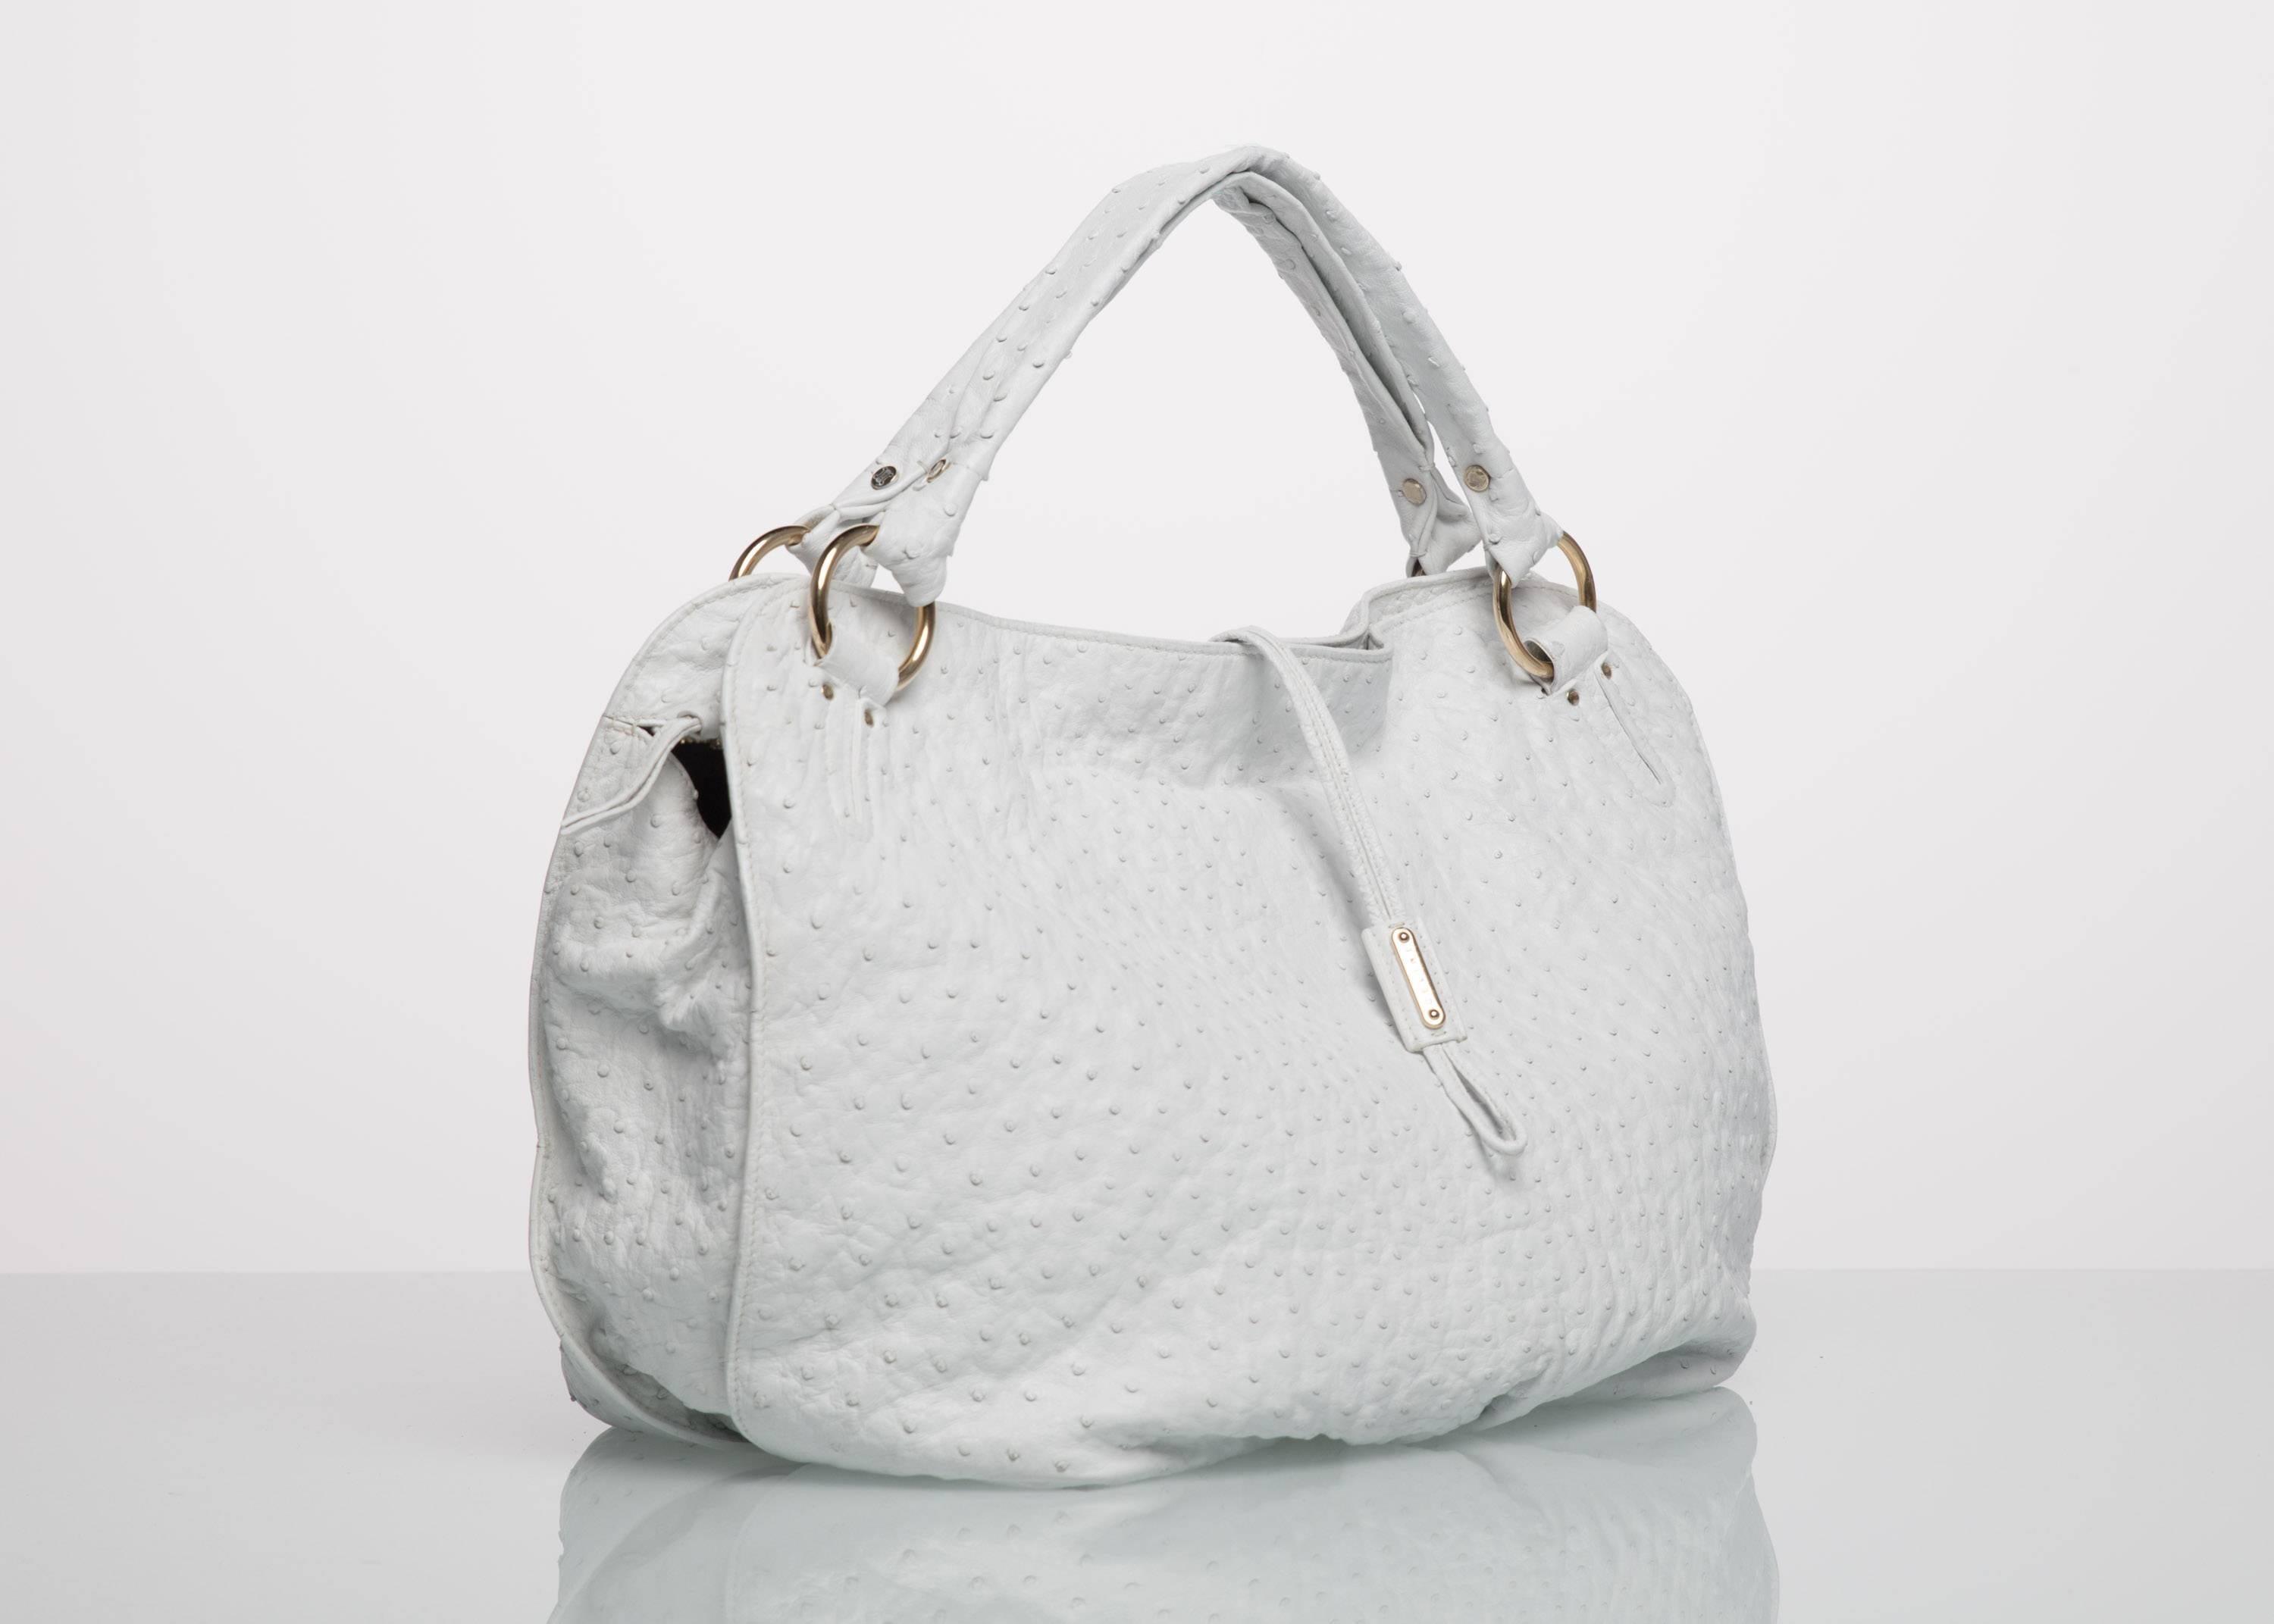 Buying a high-quality handbag is an investment, at least that’s what everyone says. A handbag by French luxury brand Céline transforms the excuse of “investment” into the reality of consummate craftsmanship, purpose, and style. While the